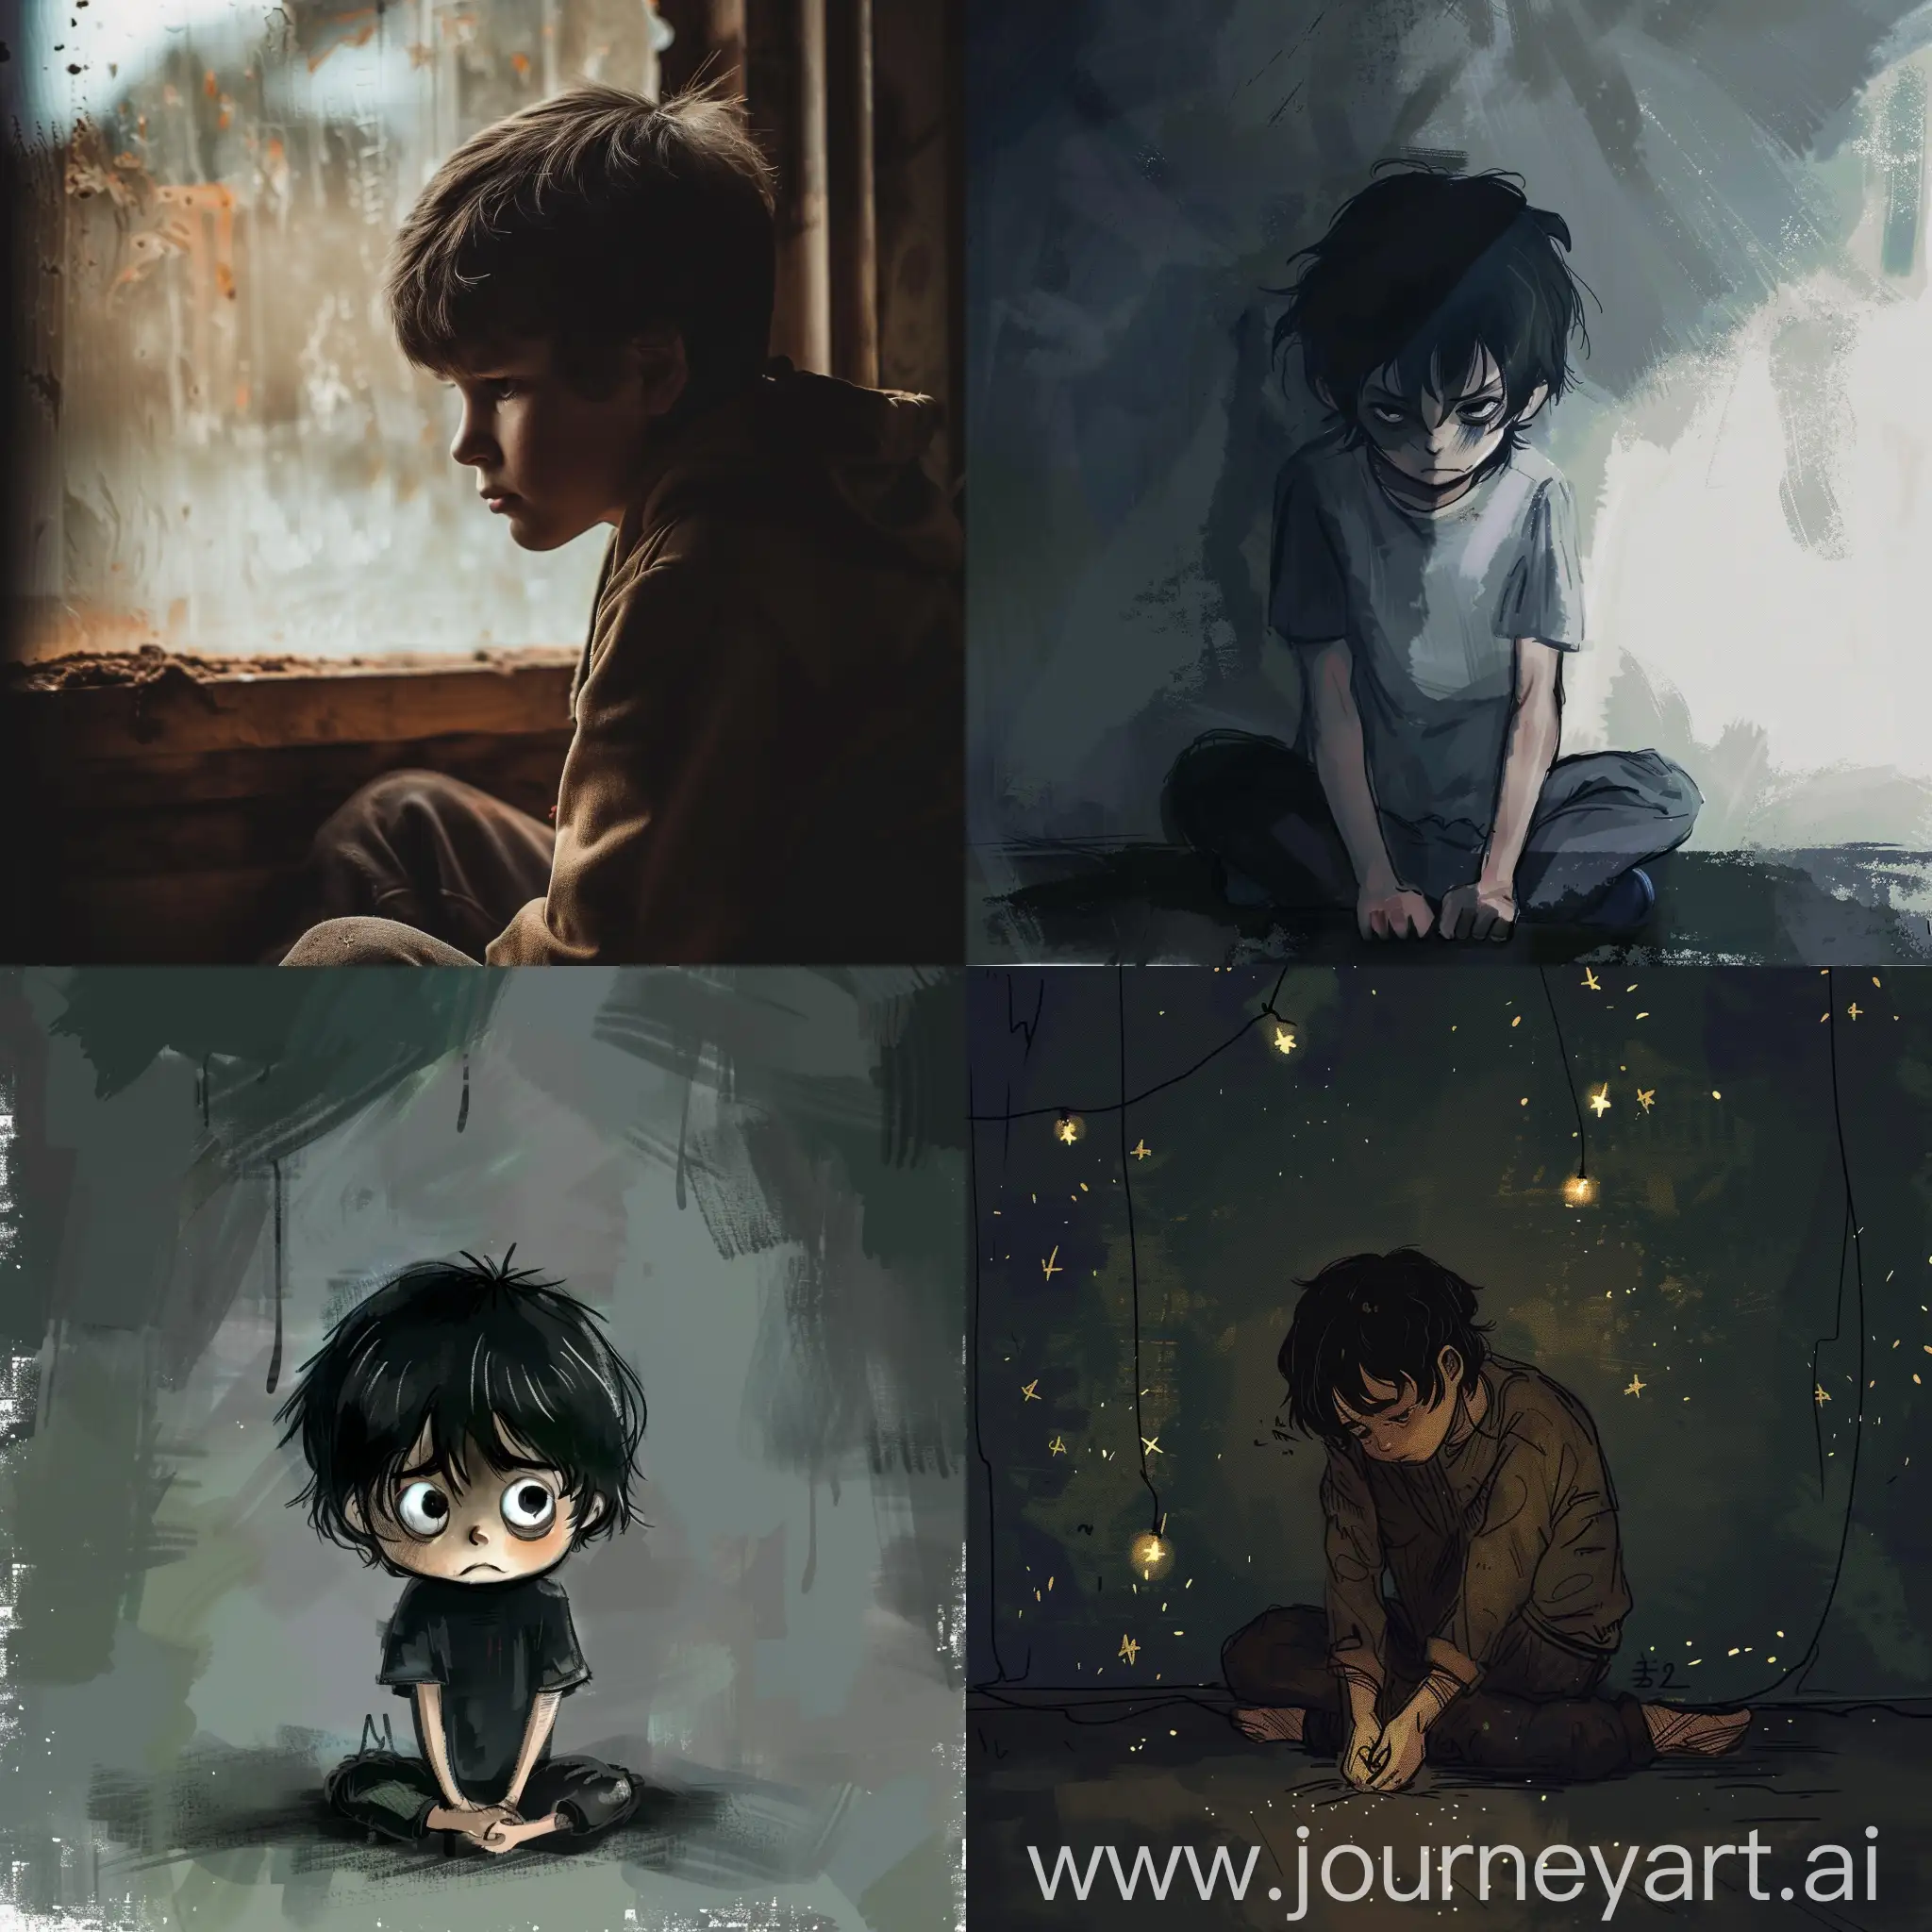 the kid with depression and loneliness